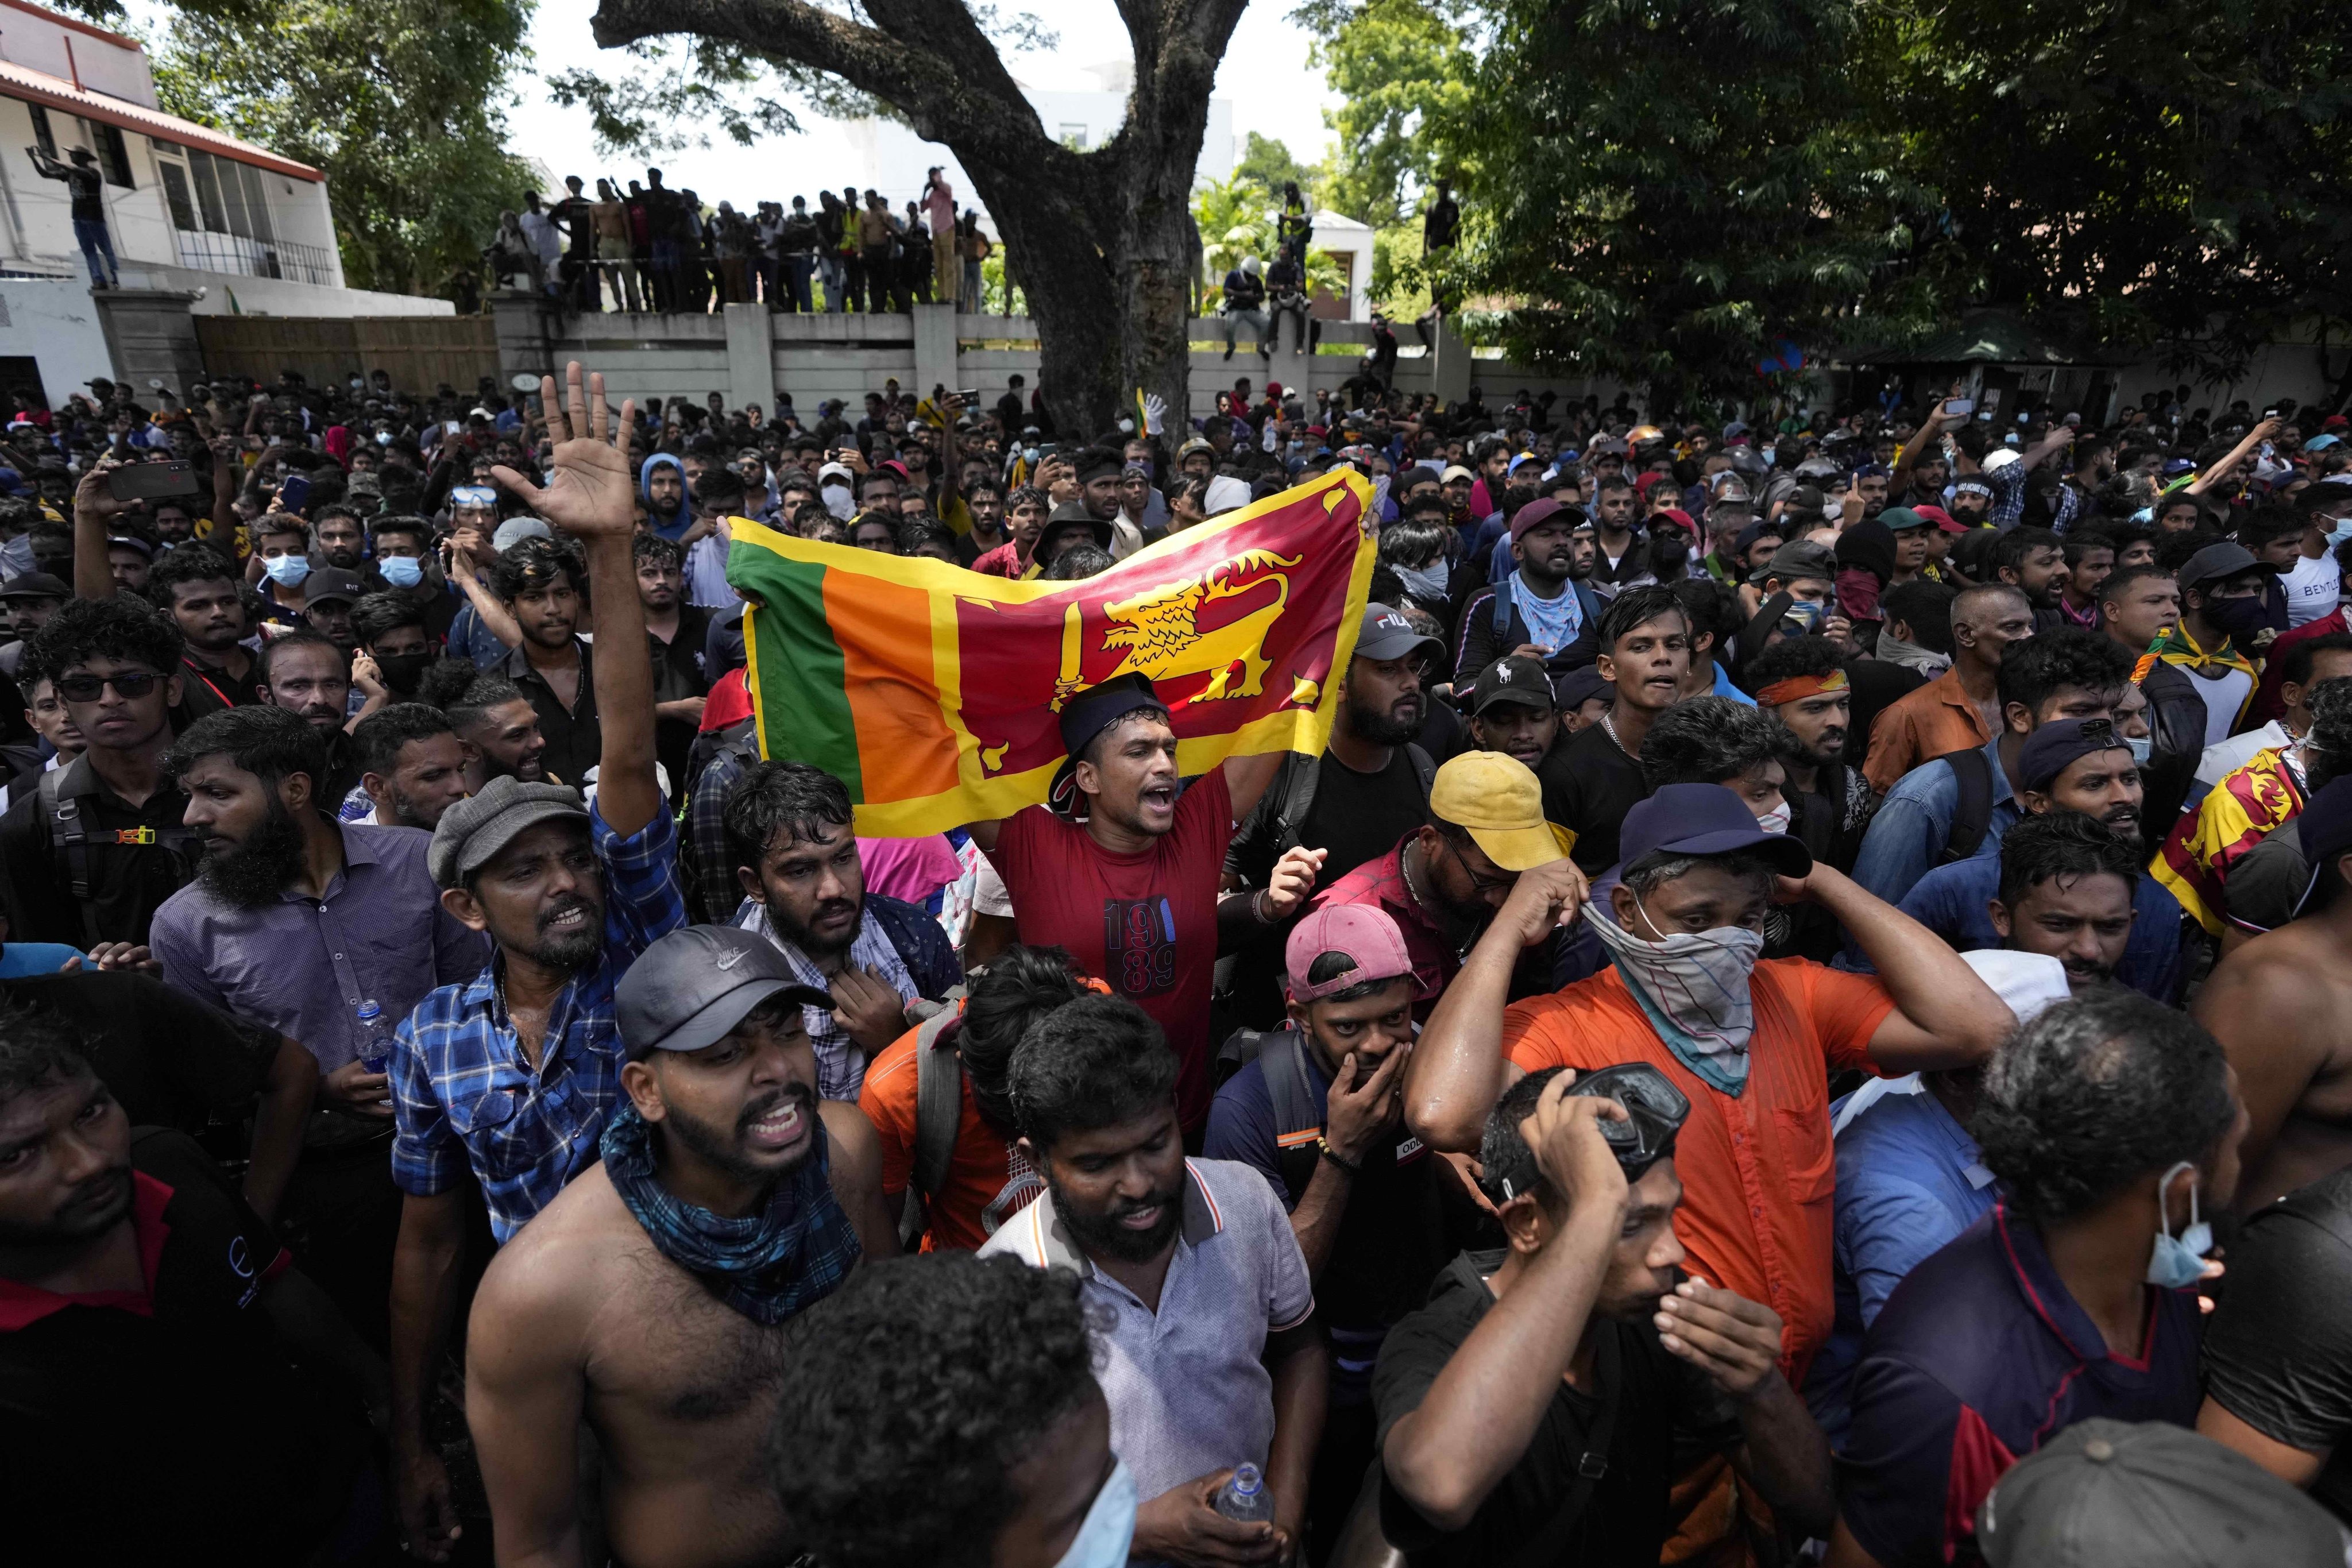 Protesters storm the office compound of Prime Minister Ranil Wickremesinghe on July 13, 2022, demanding he resign after President Gotabaya Rajapaksa fled the country amid economic crisis in Colombo. Photo: AP